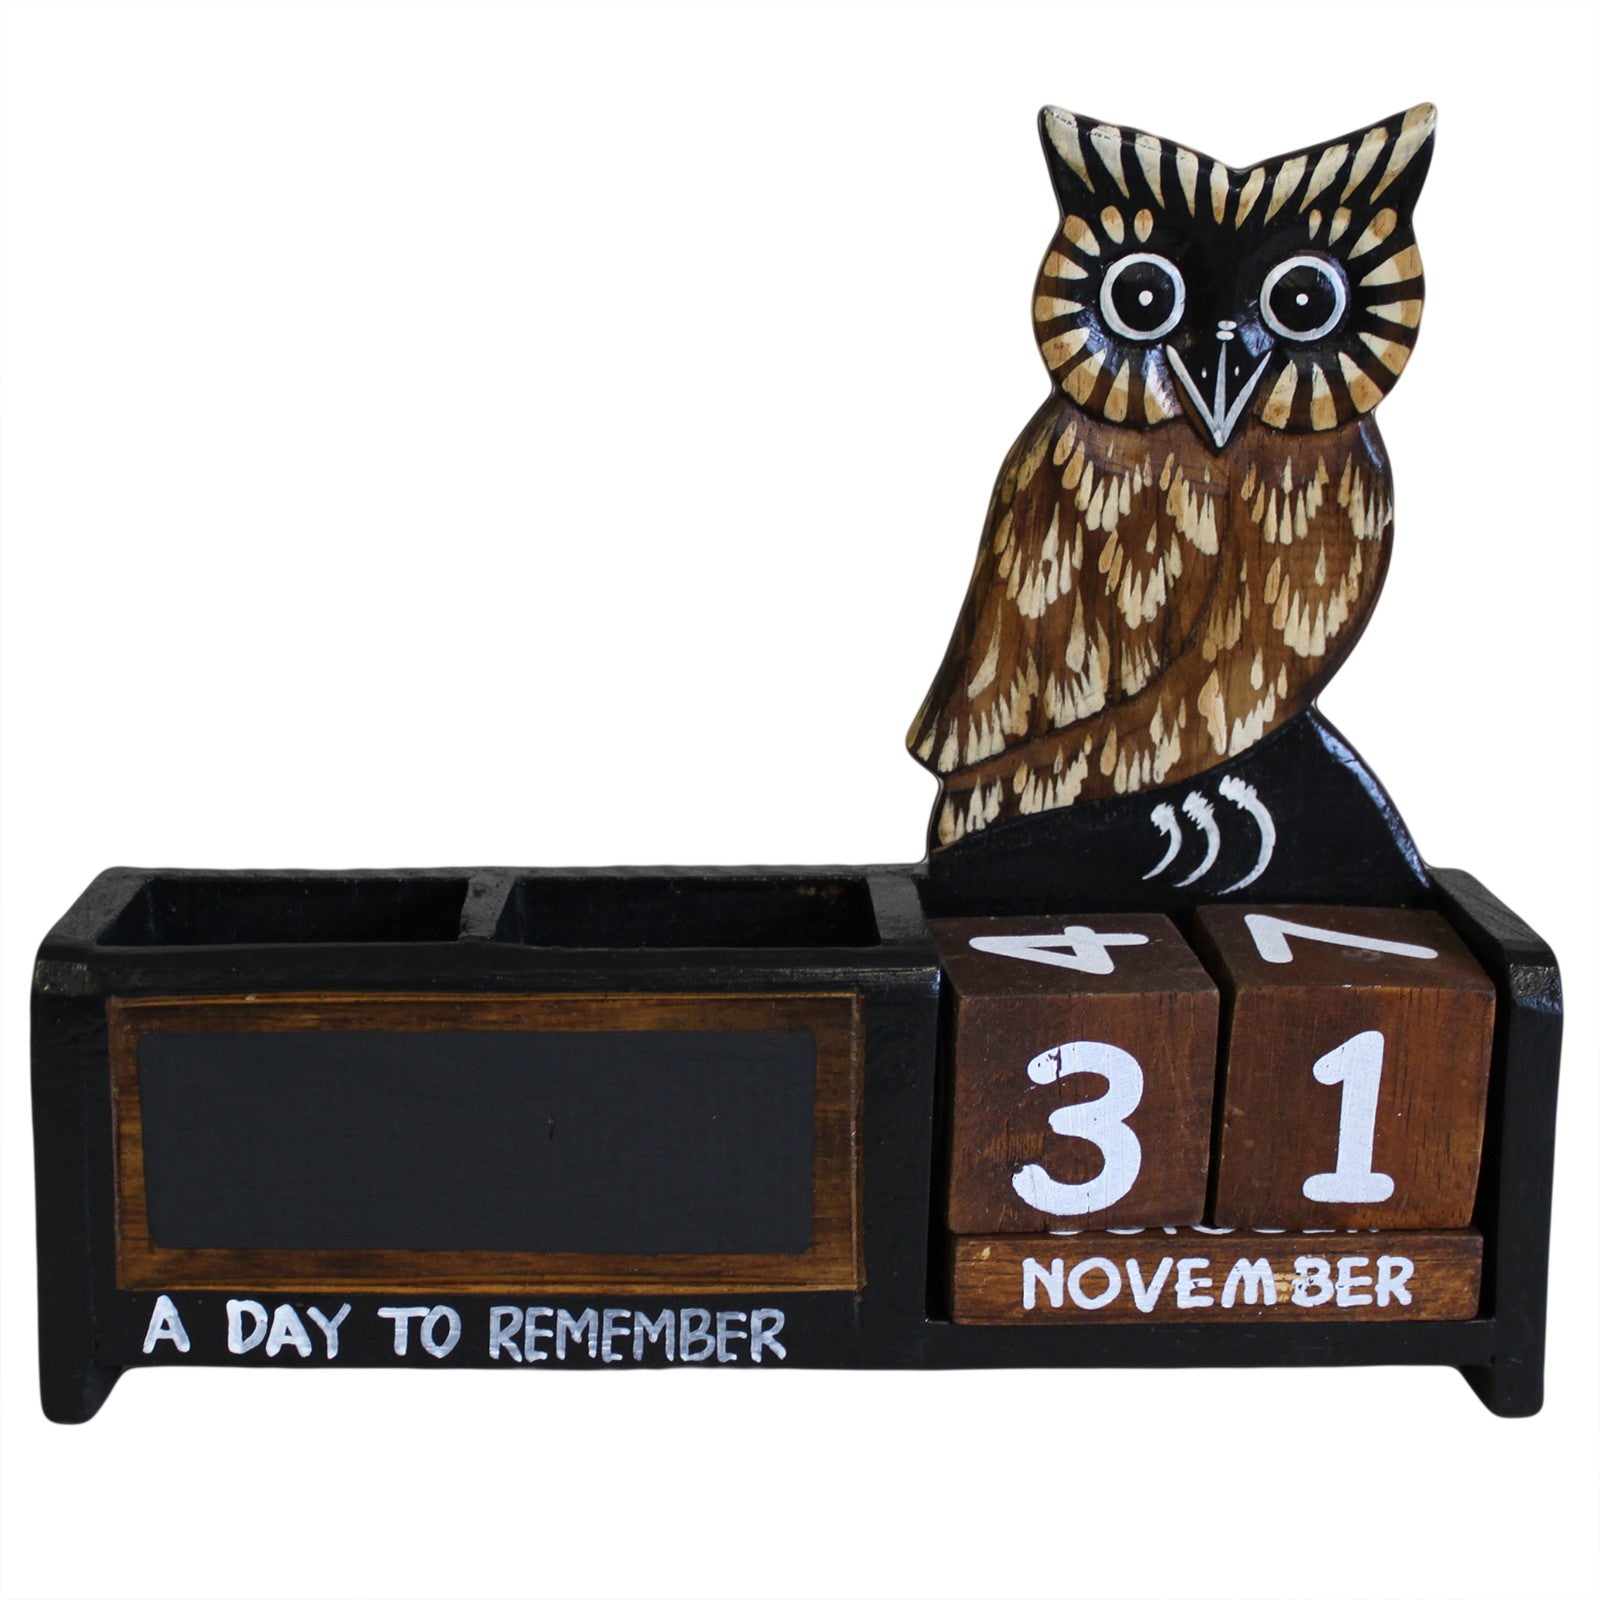 Day to Remember pen holder - Brown Owl - Shopy Max